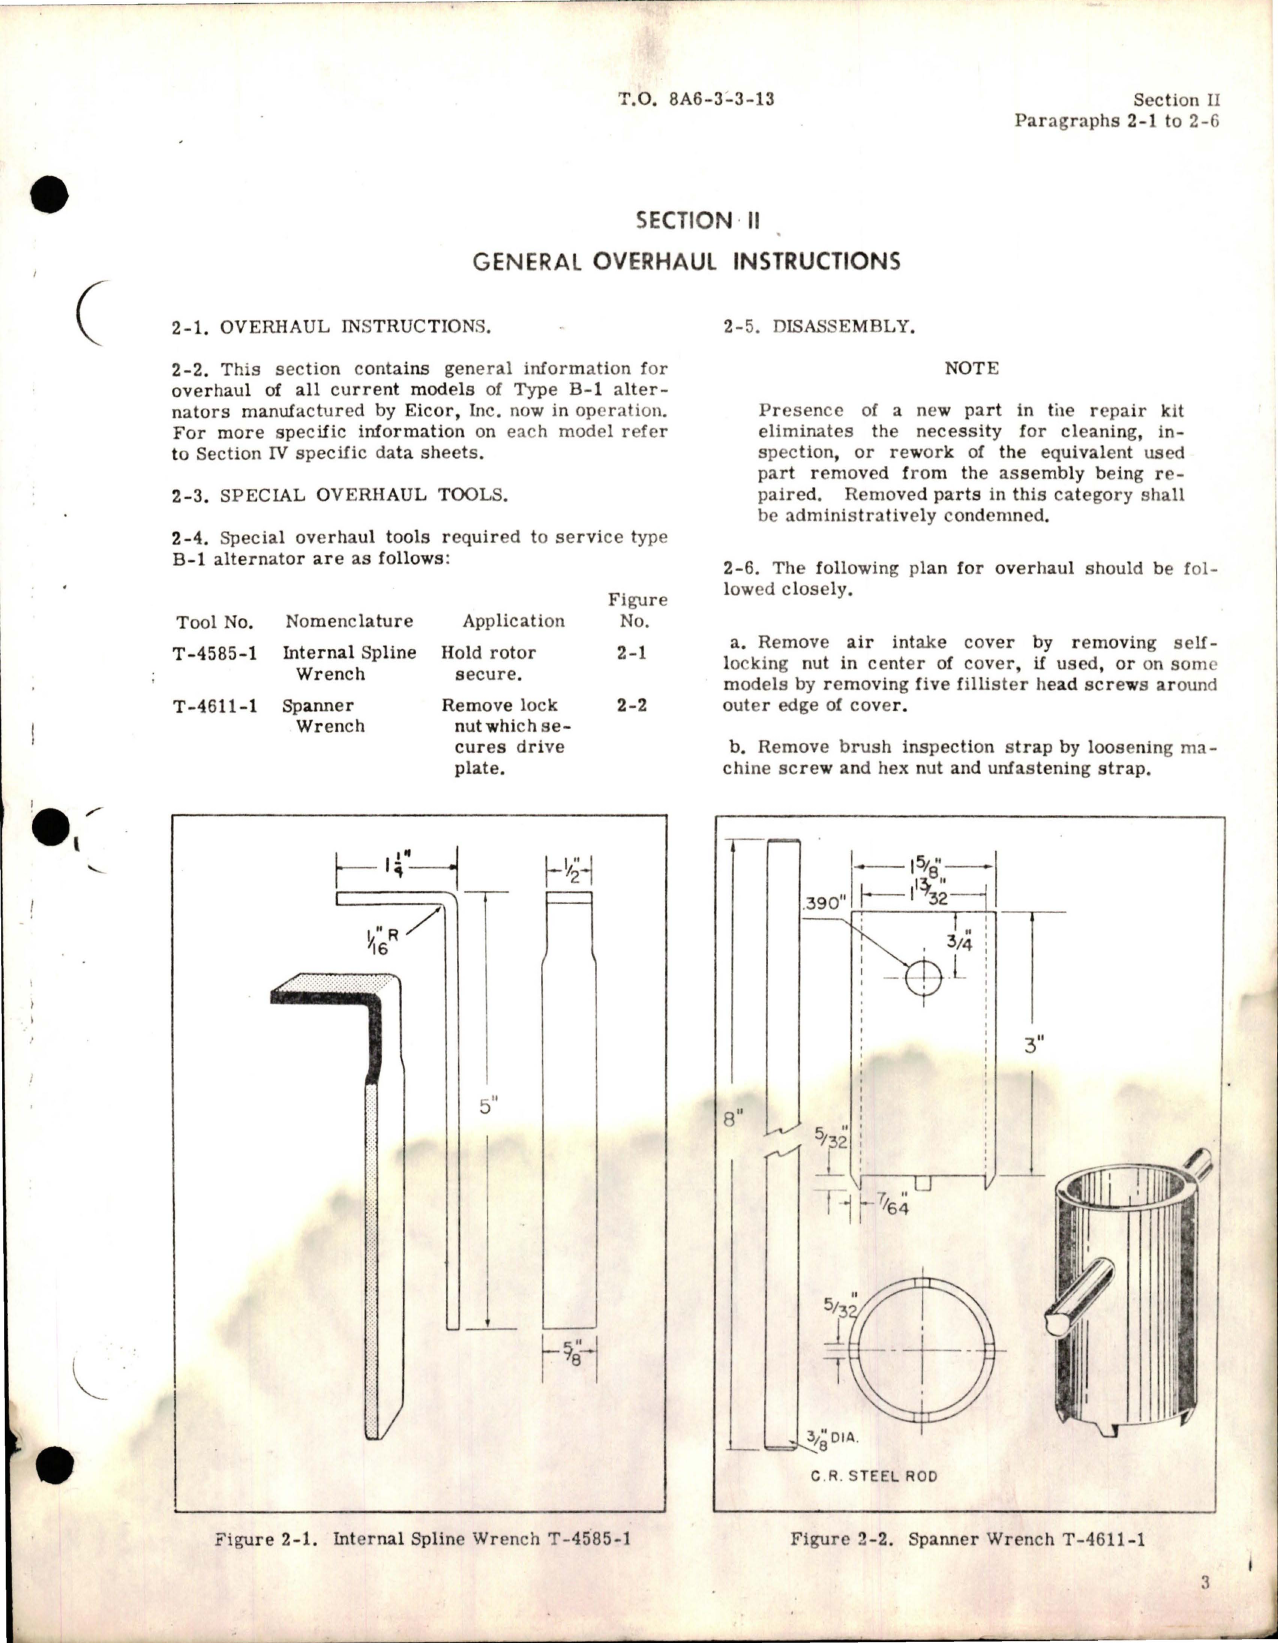 Sample page 5 from AirCorps Library document: Overhaul for Alternator - Type B-1 - Models 1-AB1-115S-4 and 1-AB1-115S-4A